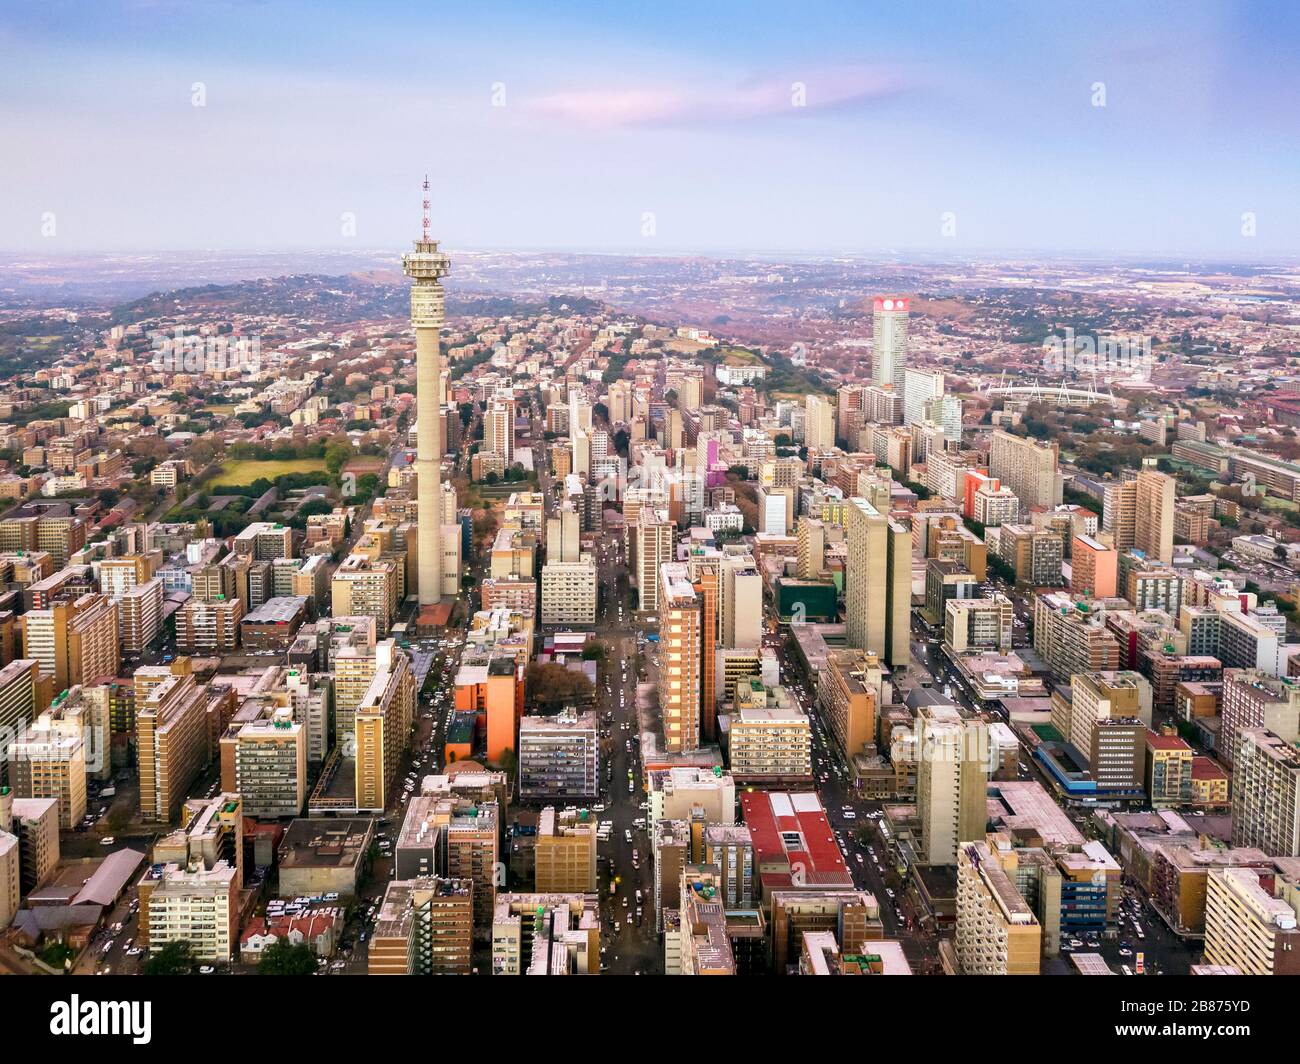 Architecture of downtown of Johannesburg, South Africa Stock Photo